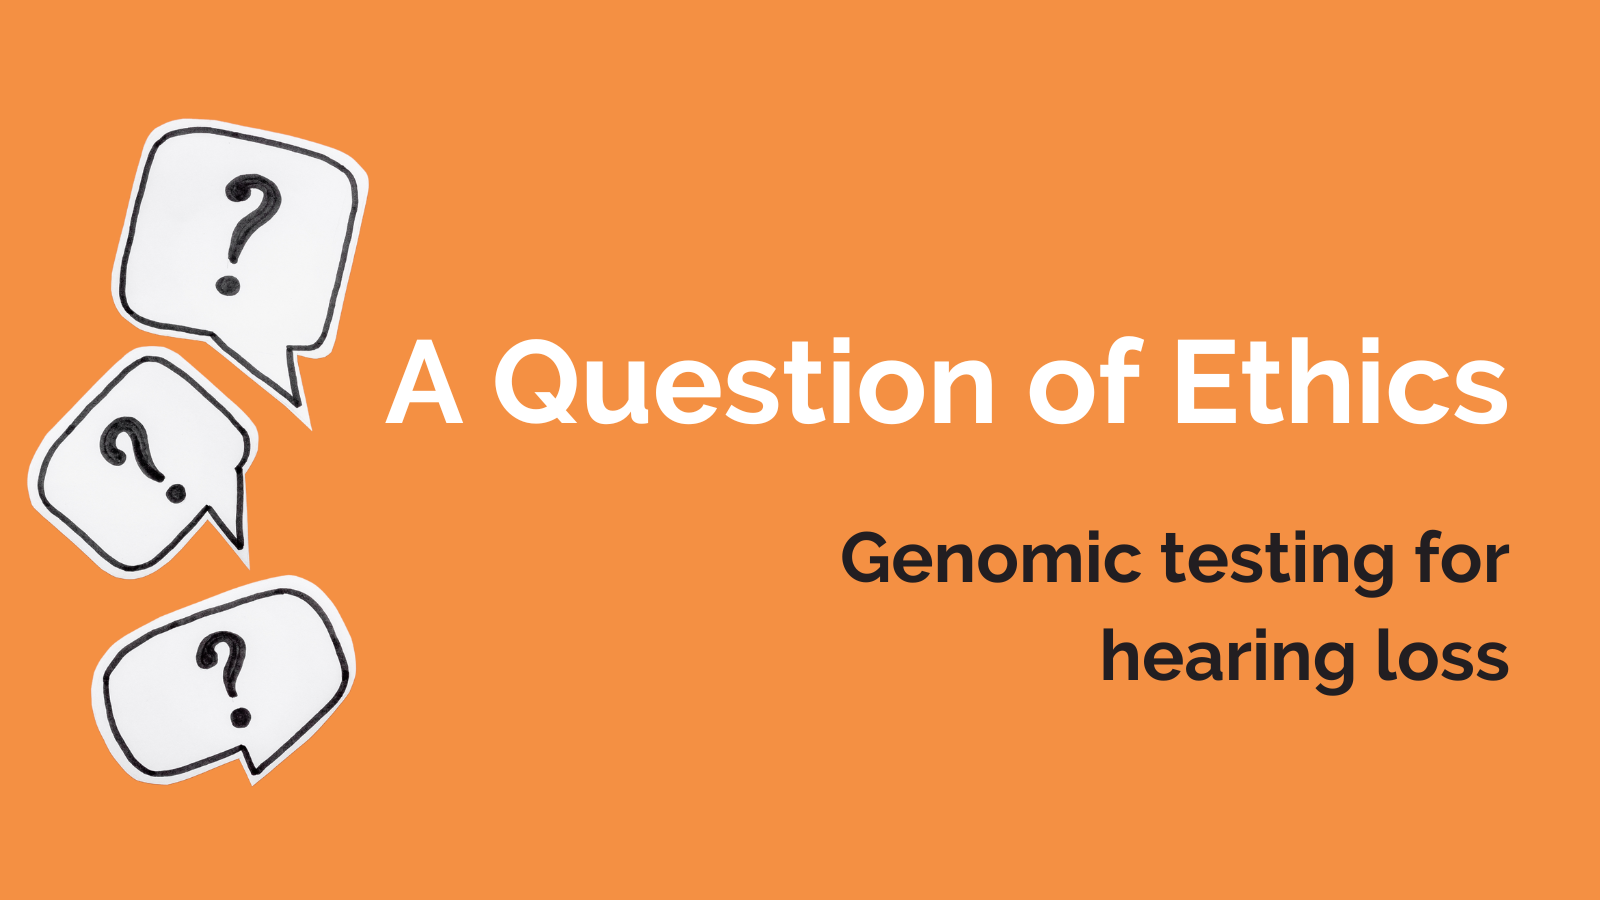 A Questions of Ethics blog: Genomic testing for hearing loss